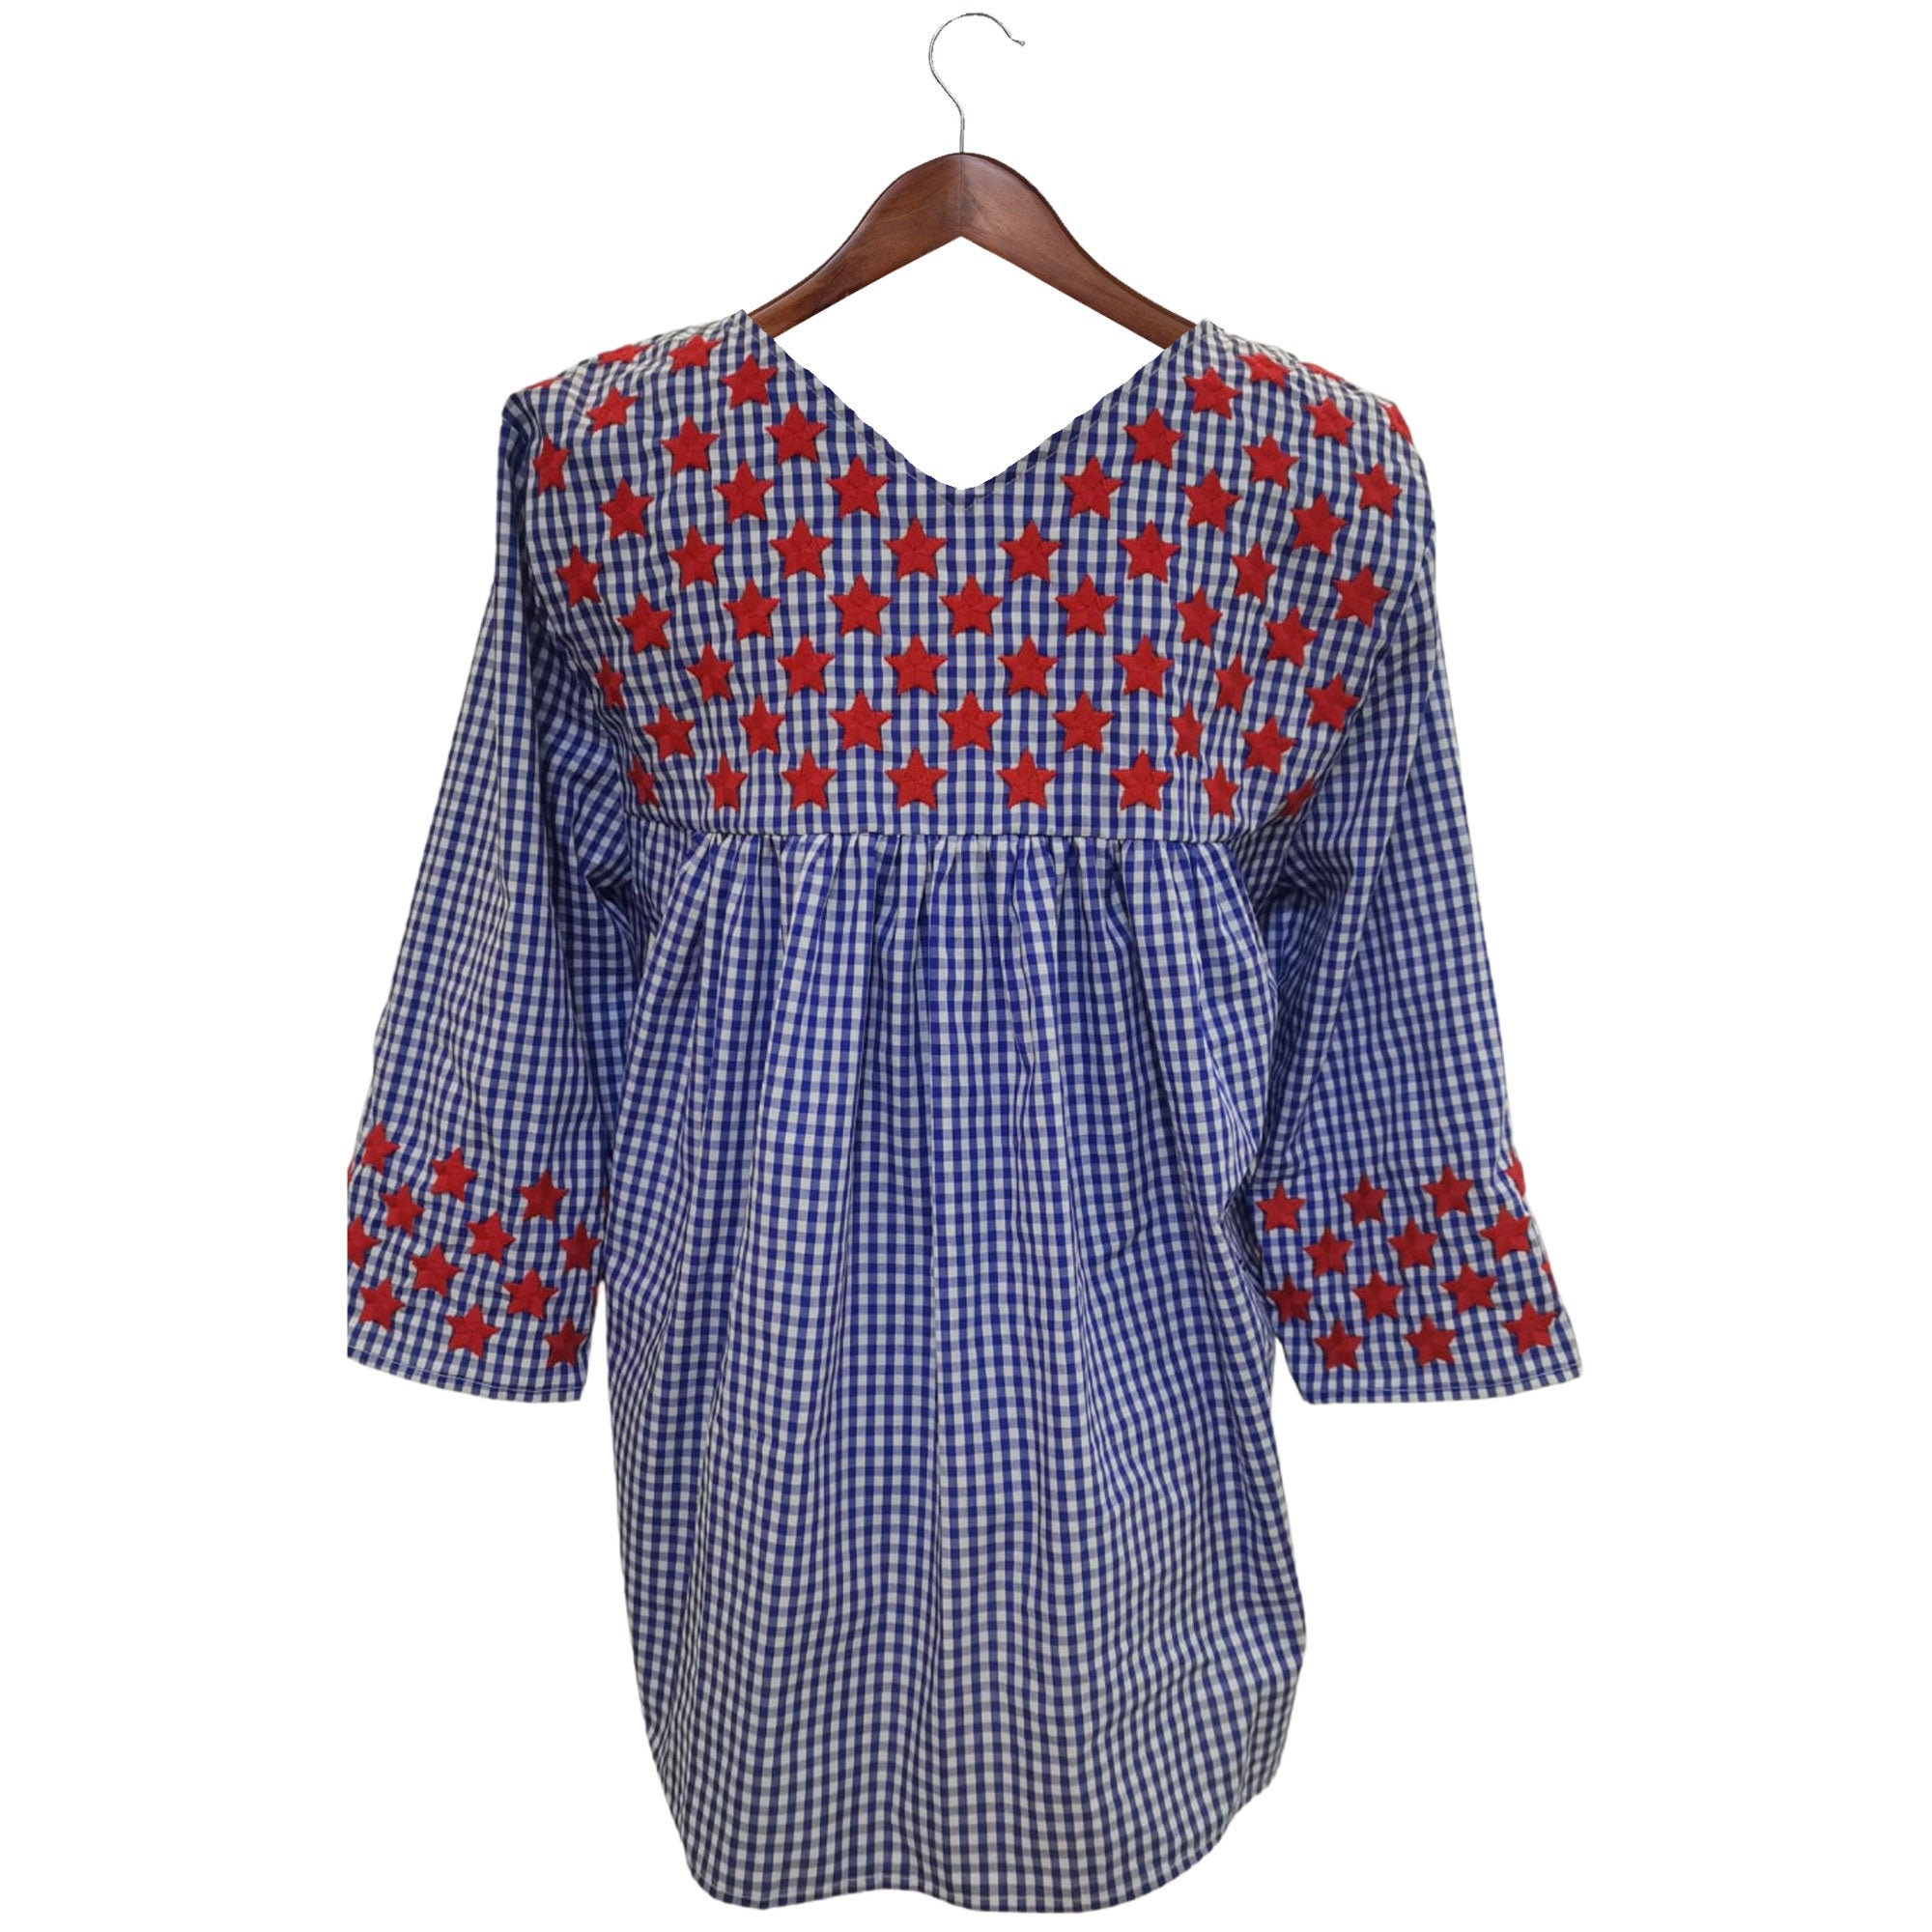 SMU Gingham Stars Saturday Blouse (XS only)